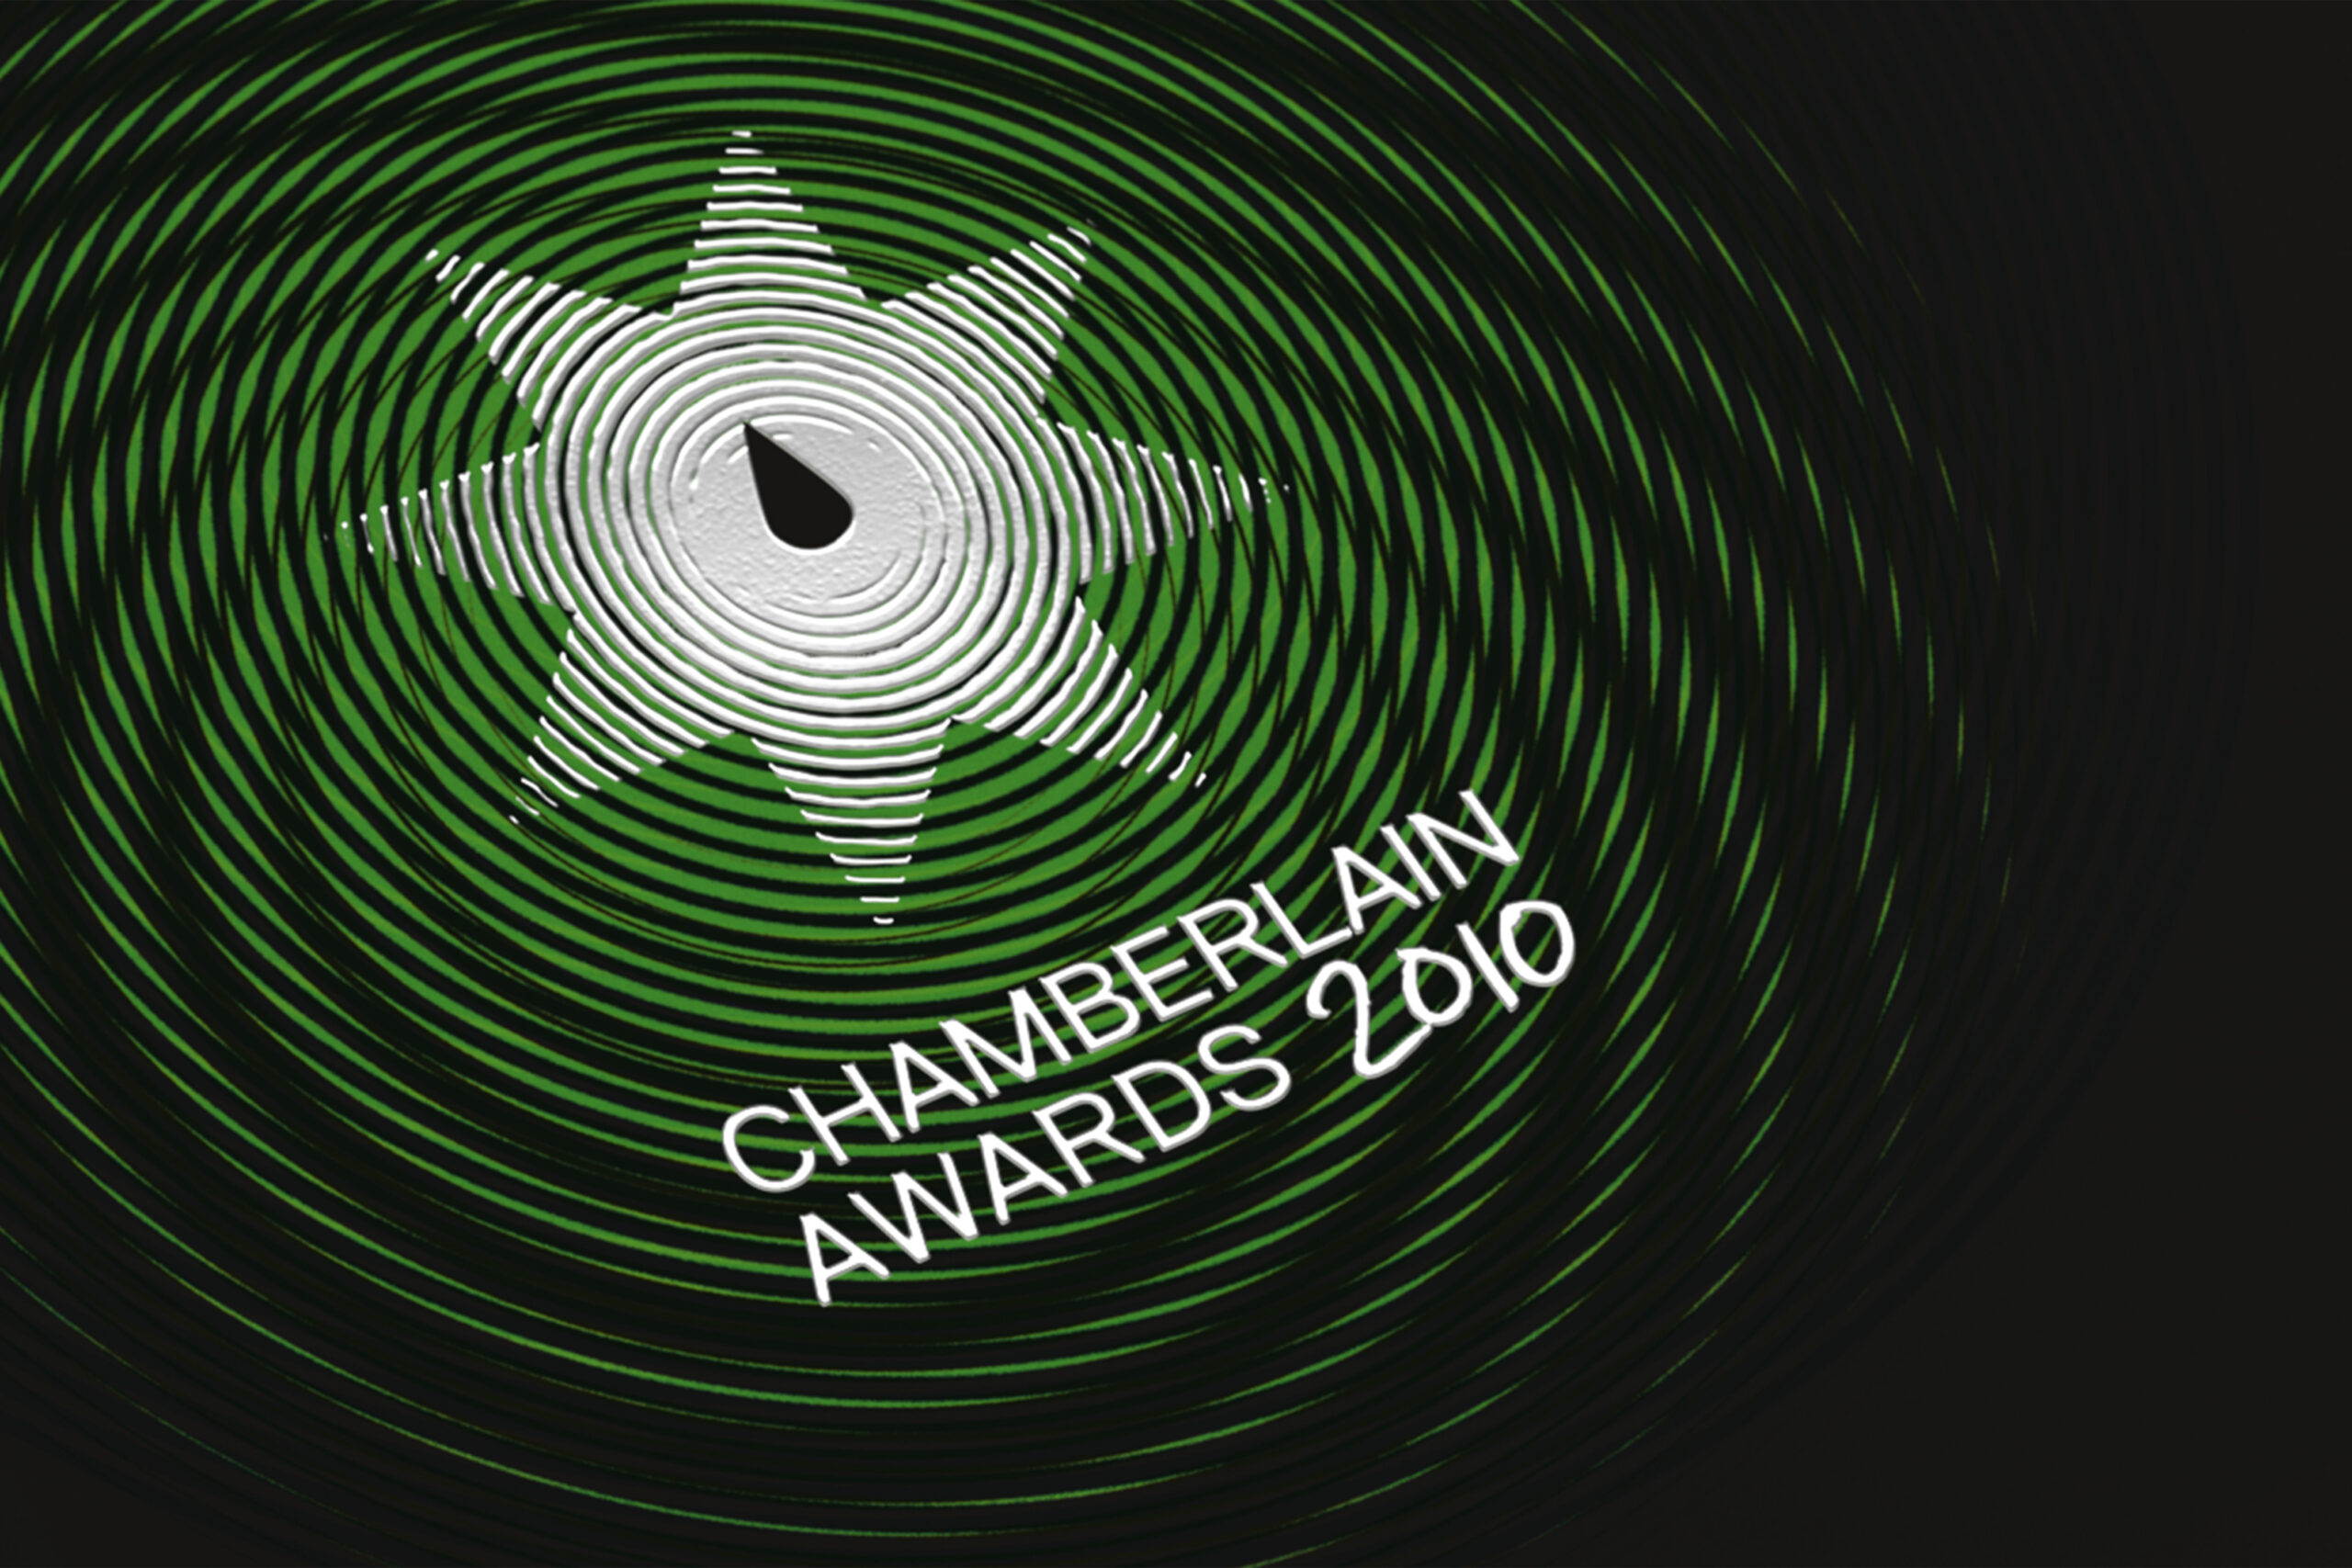 Close up image from cover of Chamberlain Awards 2010 brochure. The image shows the awards logo embossed in silver foil. The centre of the logo shows a drop of water against a background of green and black ripples.